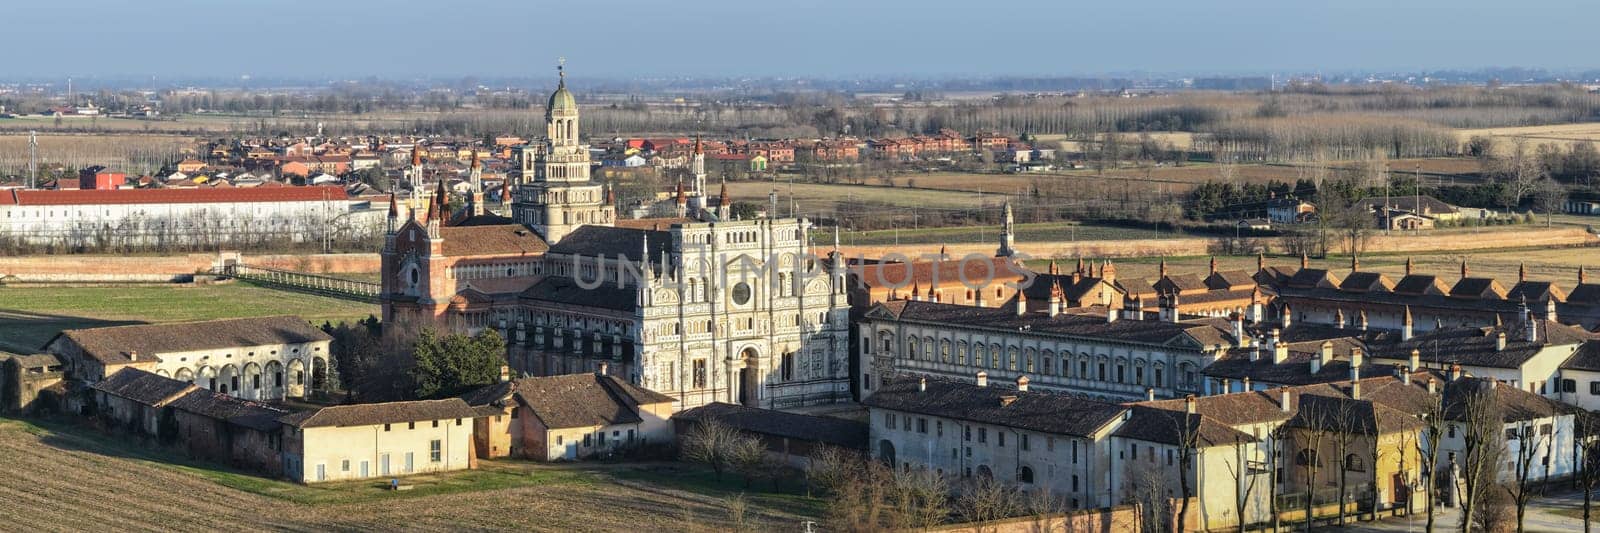 Awesome landscape view of Certosa of Pavia monastery and sanctuary by Robertobinetti70